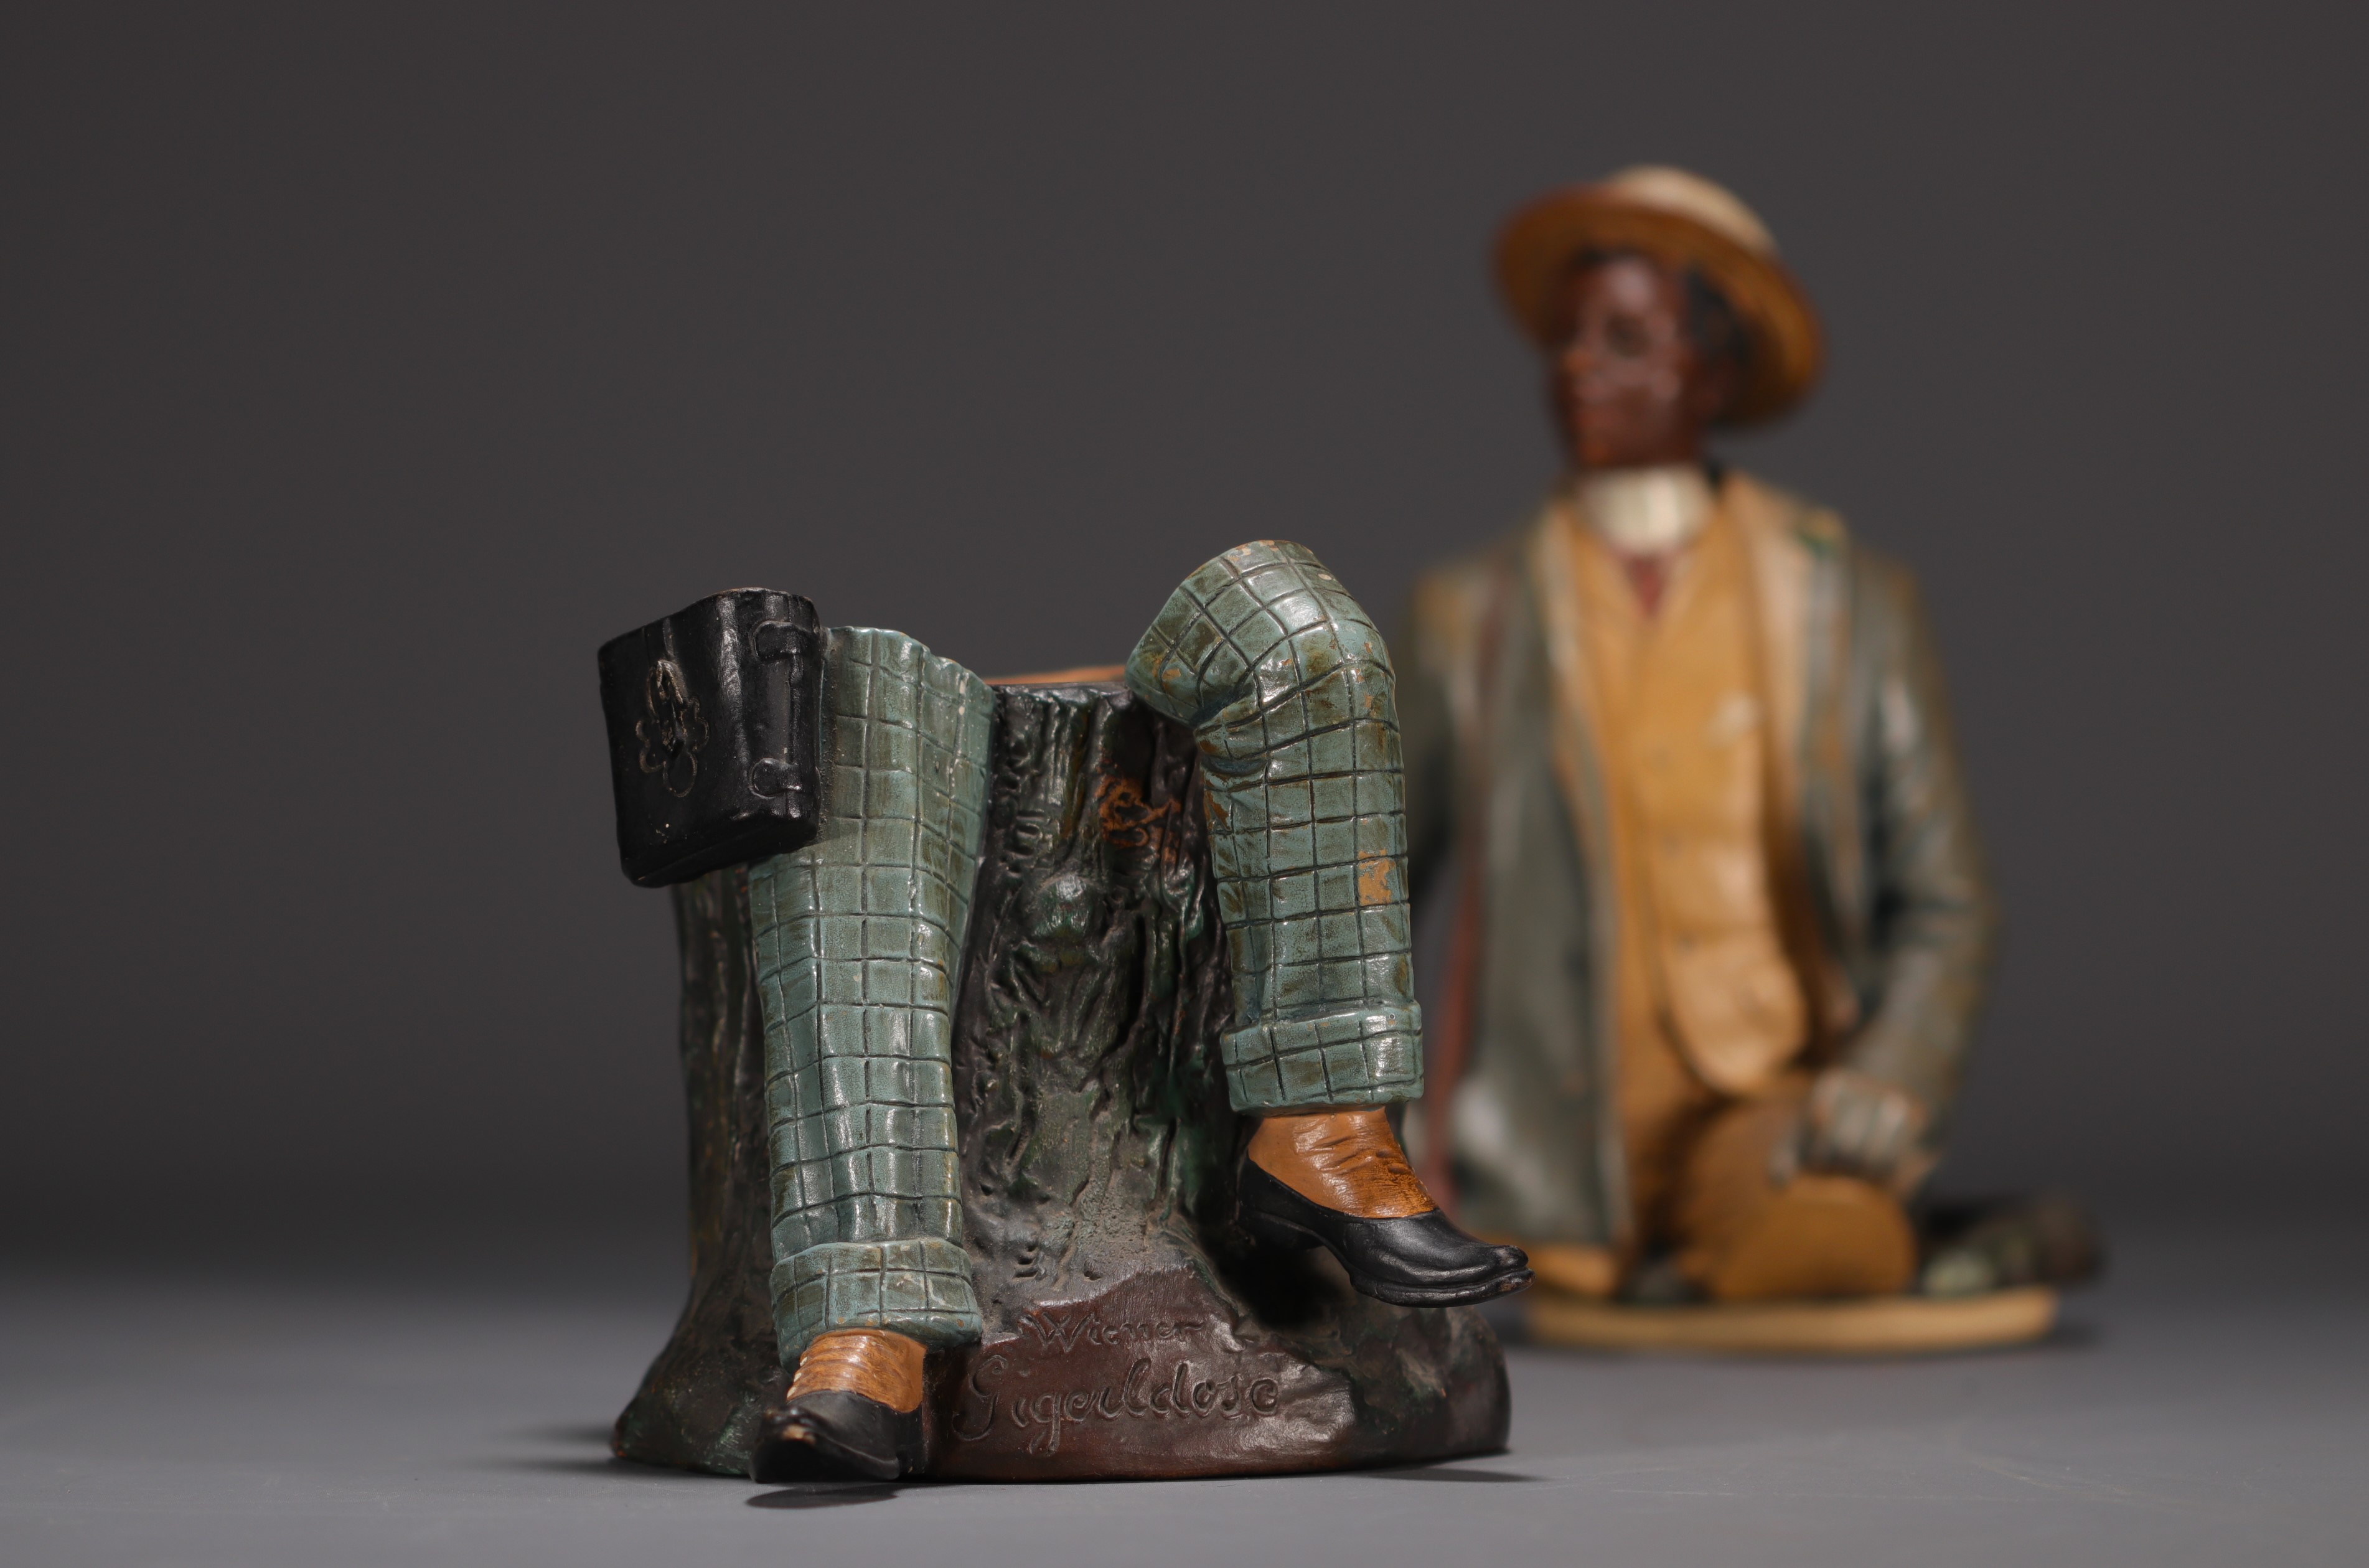 Bernard BLOCH (1836-1909) "African dandy with monocle" Polychrome terracotta tobacco pot. - Image 5 of 5